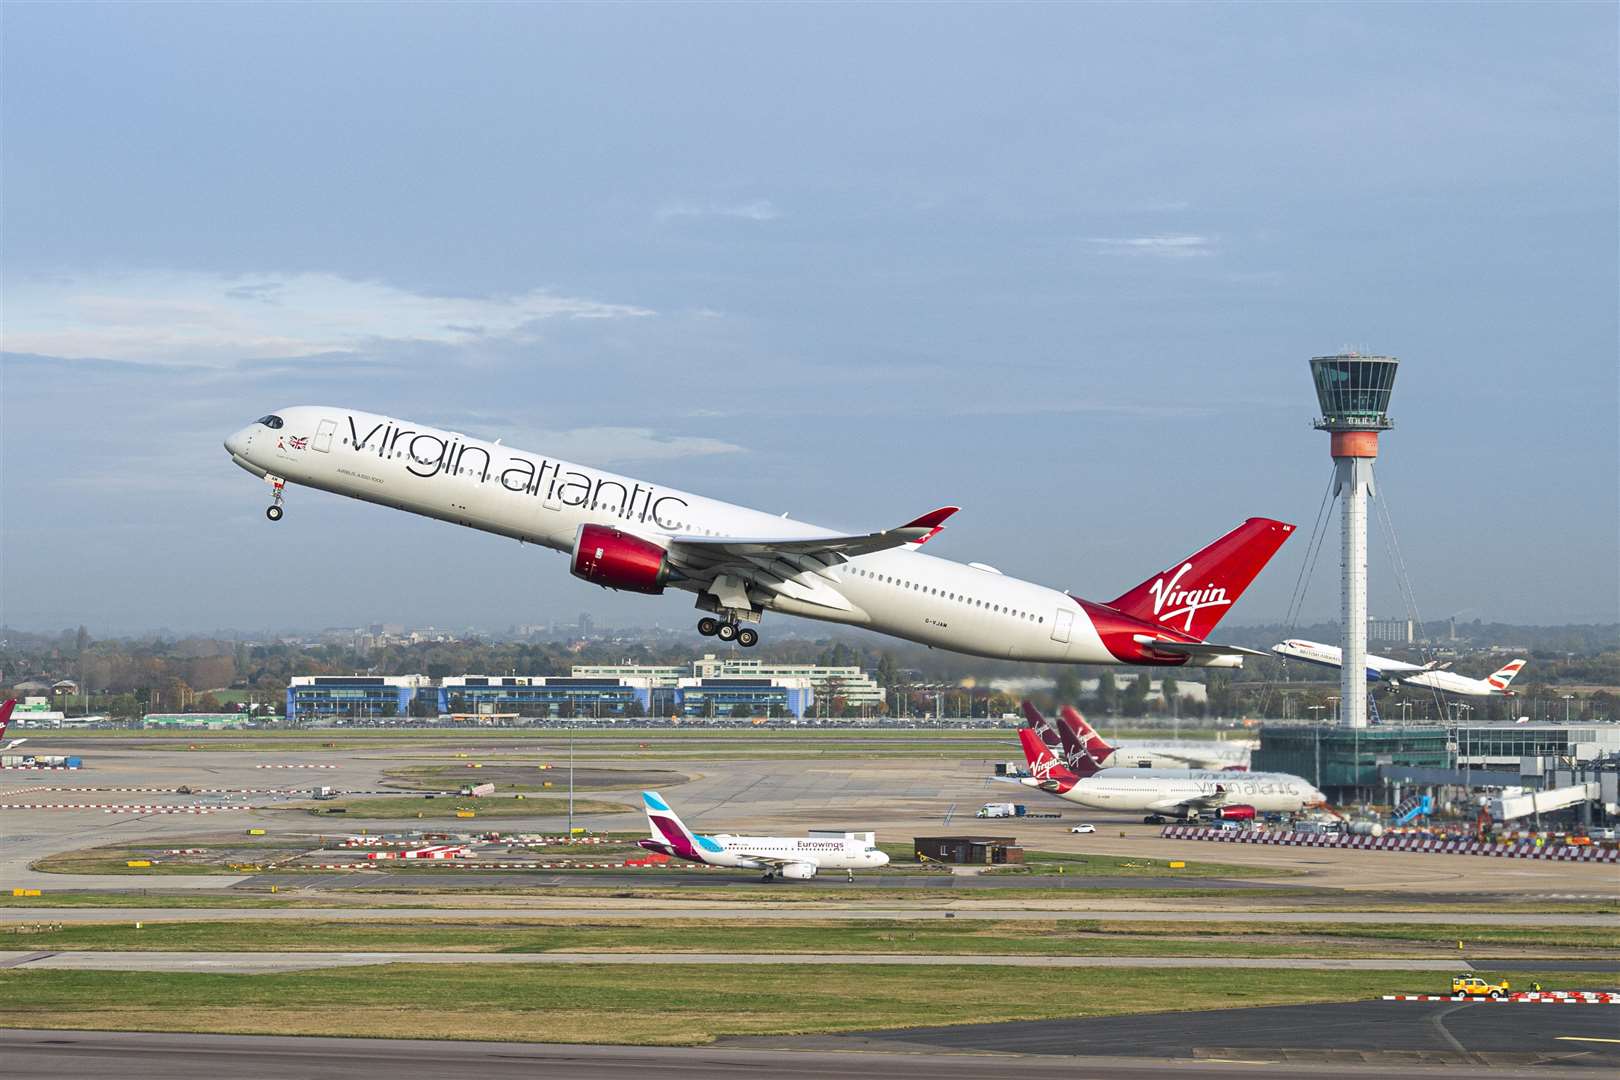 Virgin Atlantic was among the airlines which appealed against the CAA’s decision (Anthony Upton/PA)